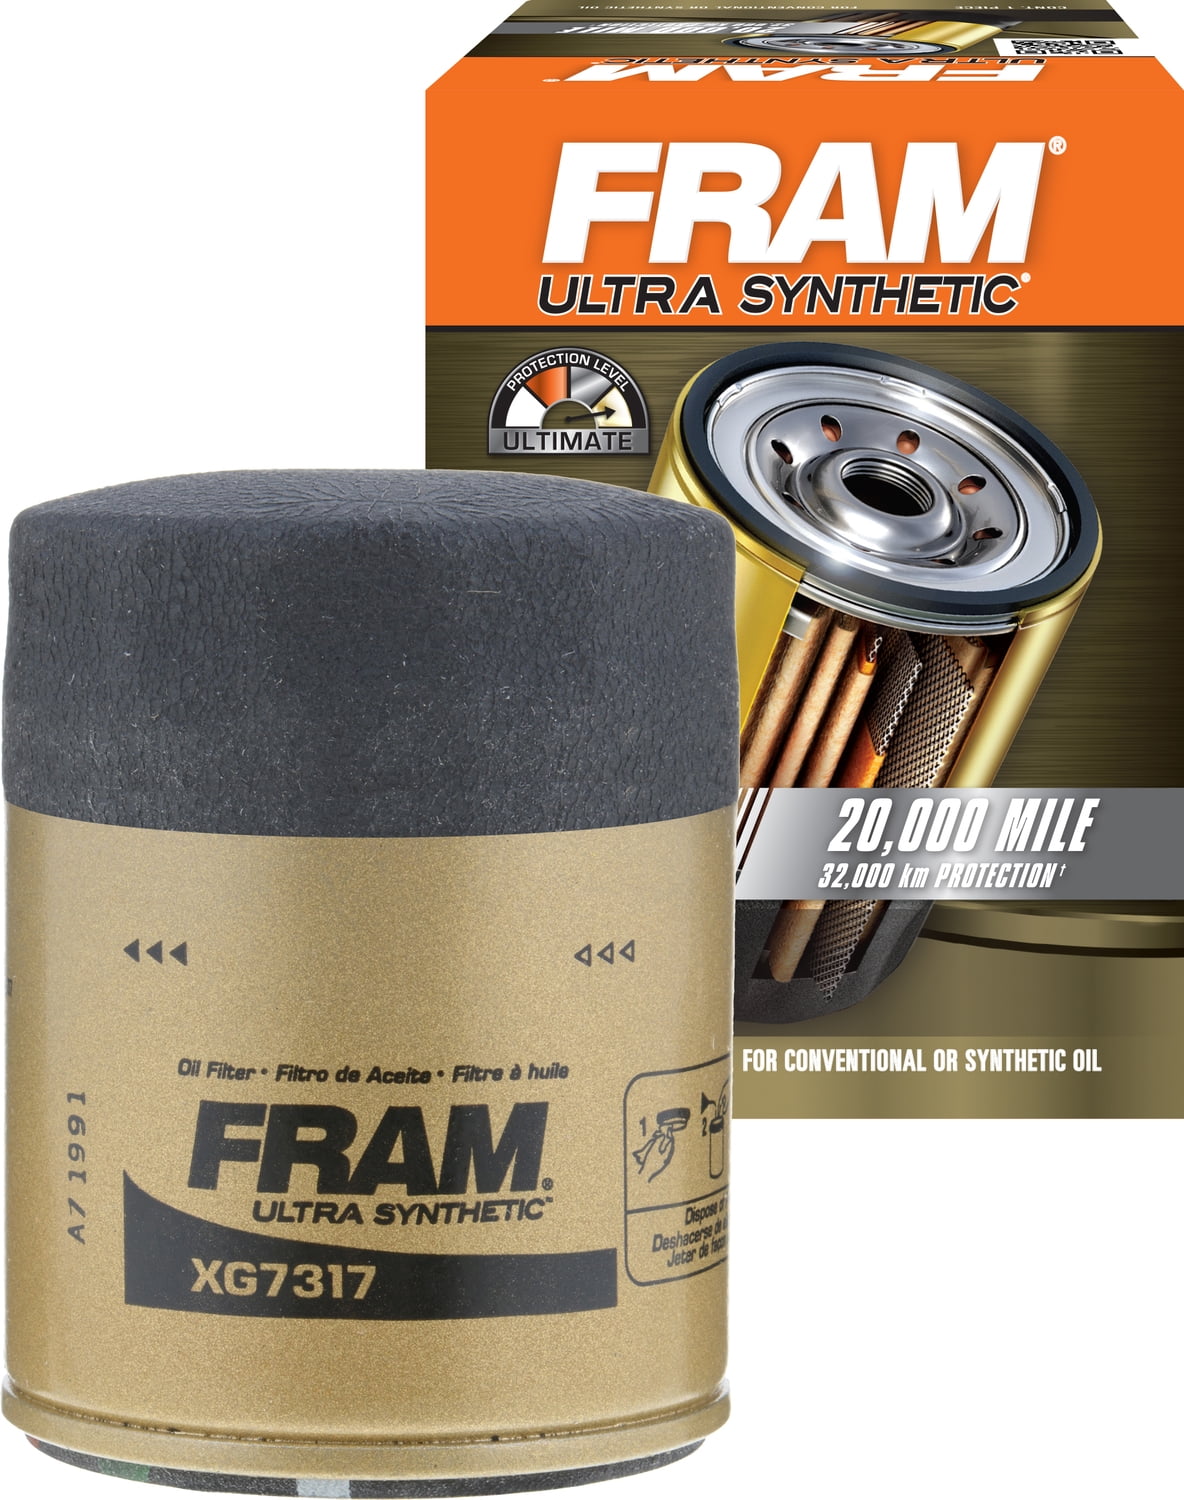  FRAM Ultra Synthetic Automotive Replacement Oil Filter,  Designed for Synthetic Oil Changes Lasting up to 20k Miles, XG7317 with  SureGrip (Pack of 1) : Automotive